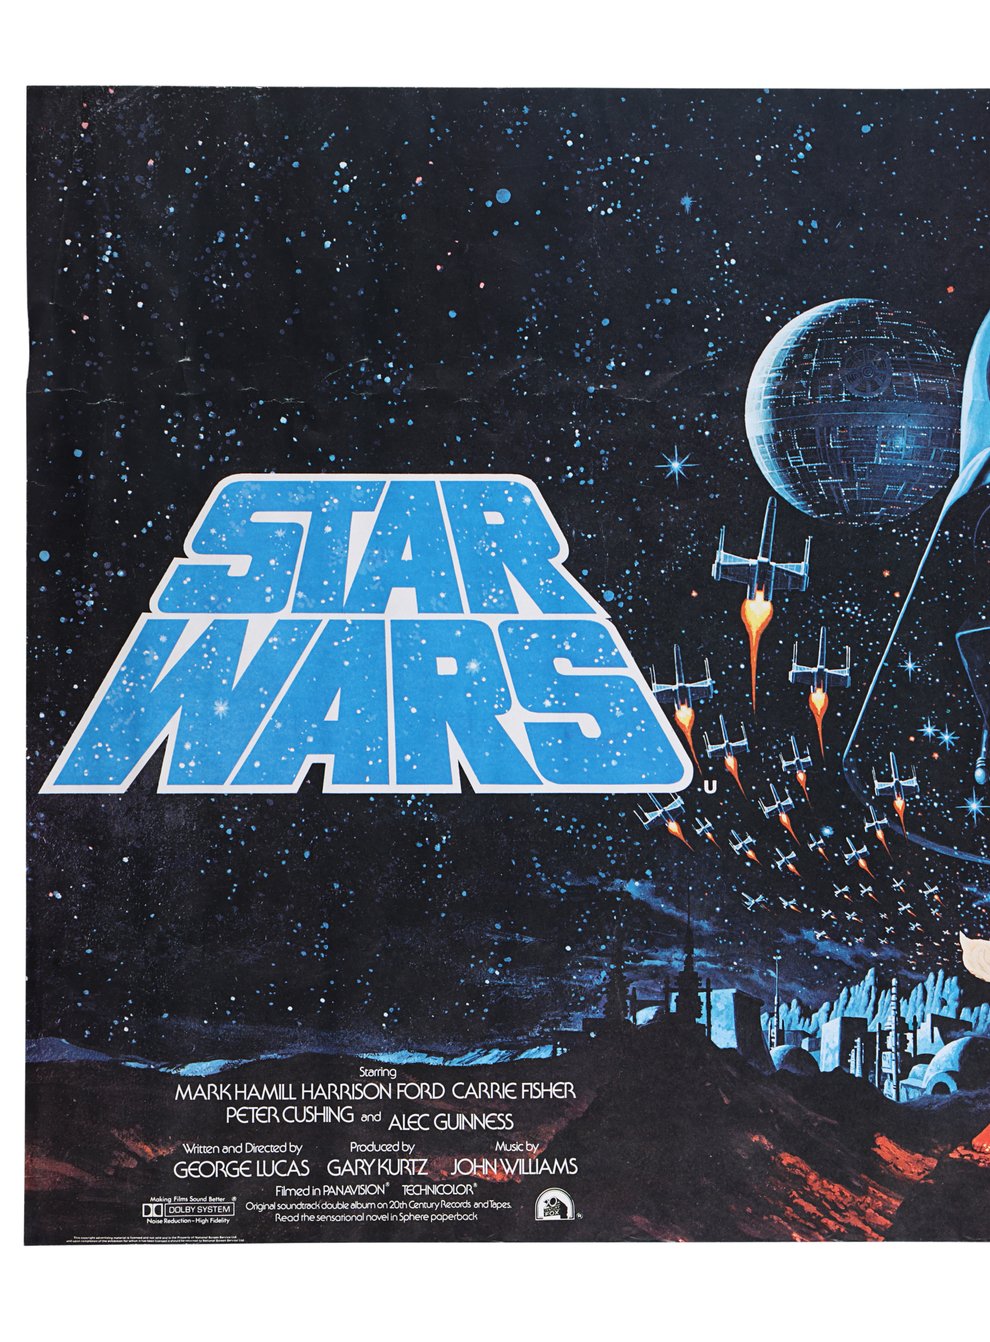 The rare Star Wars poster (The Prop Store/PA)